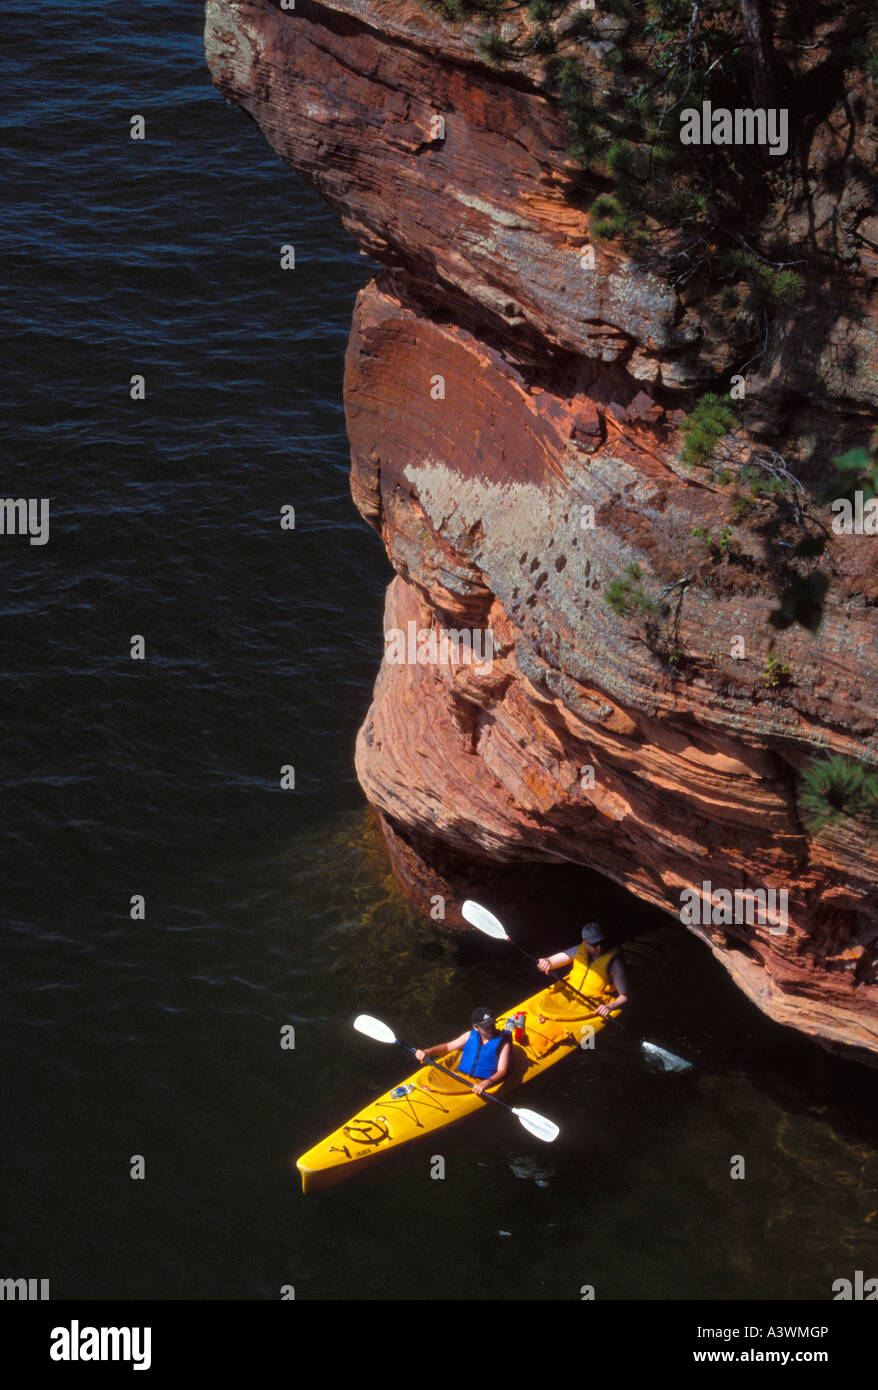 KAYAKERS IN A TANDEM KAYAK EXIT A SEA CAVE AT SQUAW POINT IN THE APOSTLE ISLANDS NATIONAL LAKESHORE NEAR BAYFIELD WISCONSIN Stock Photo